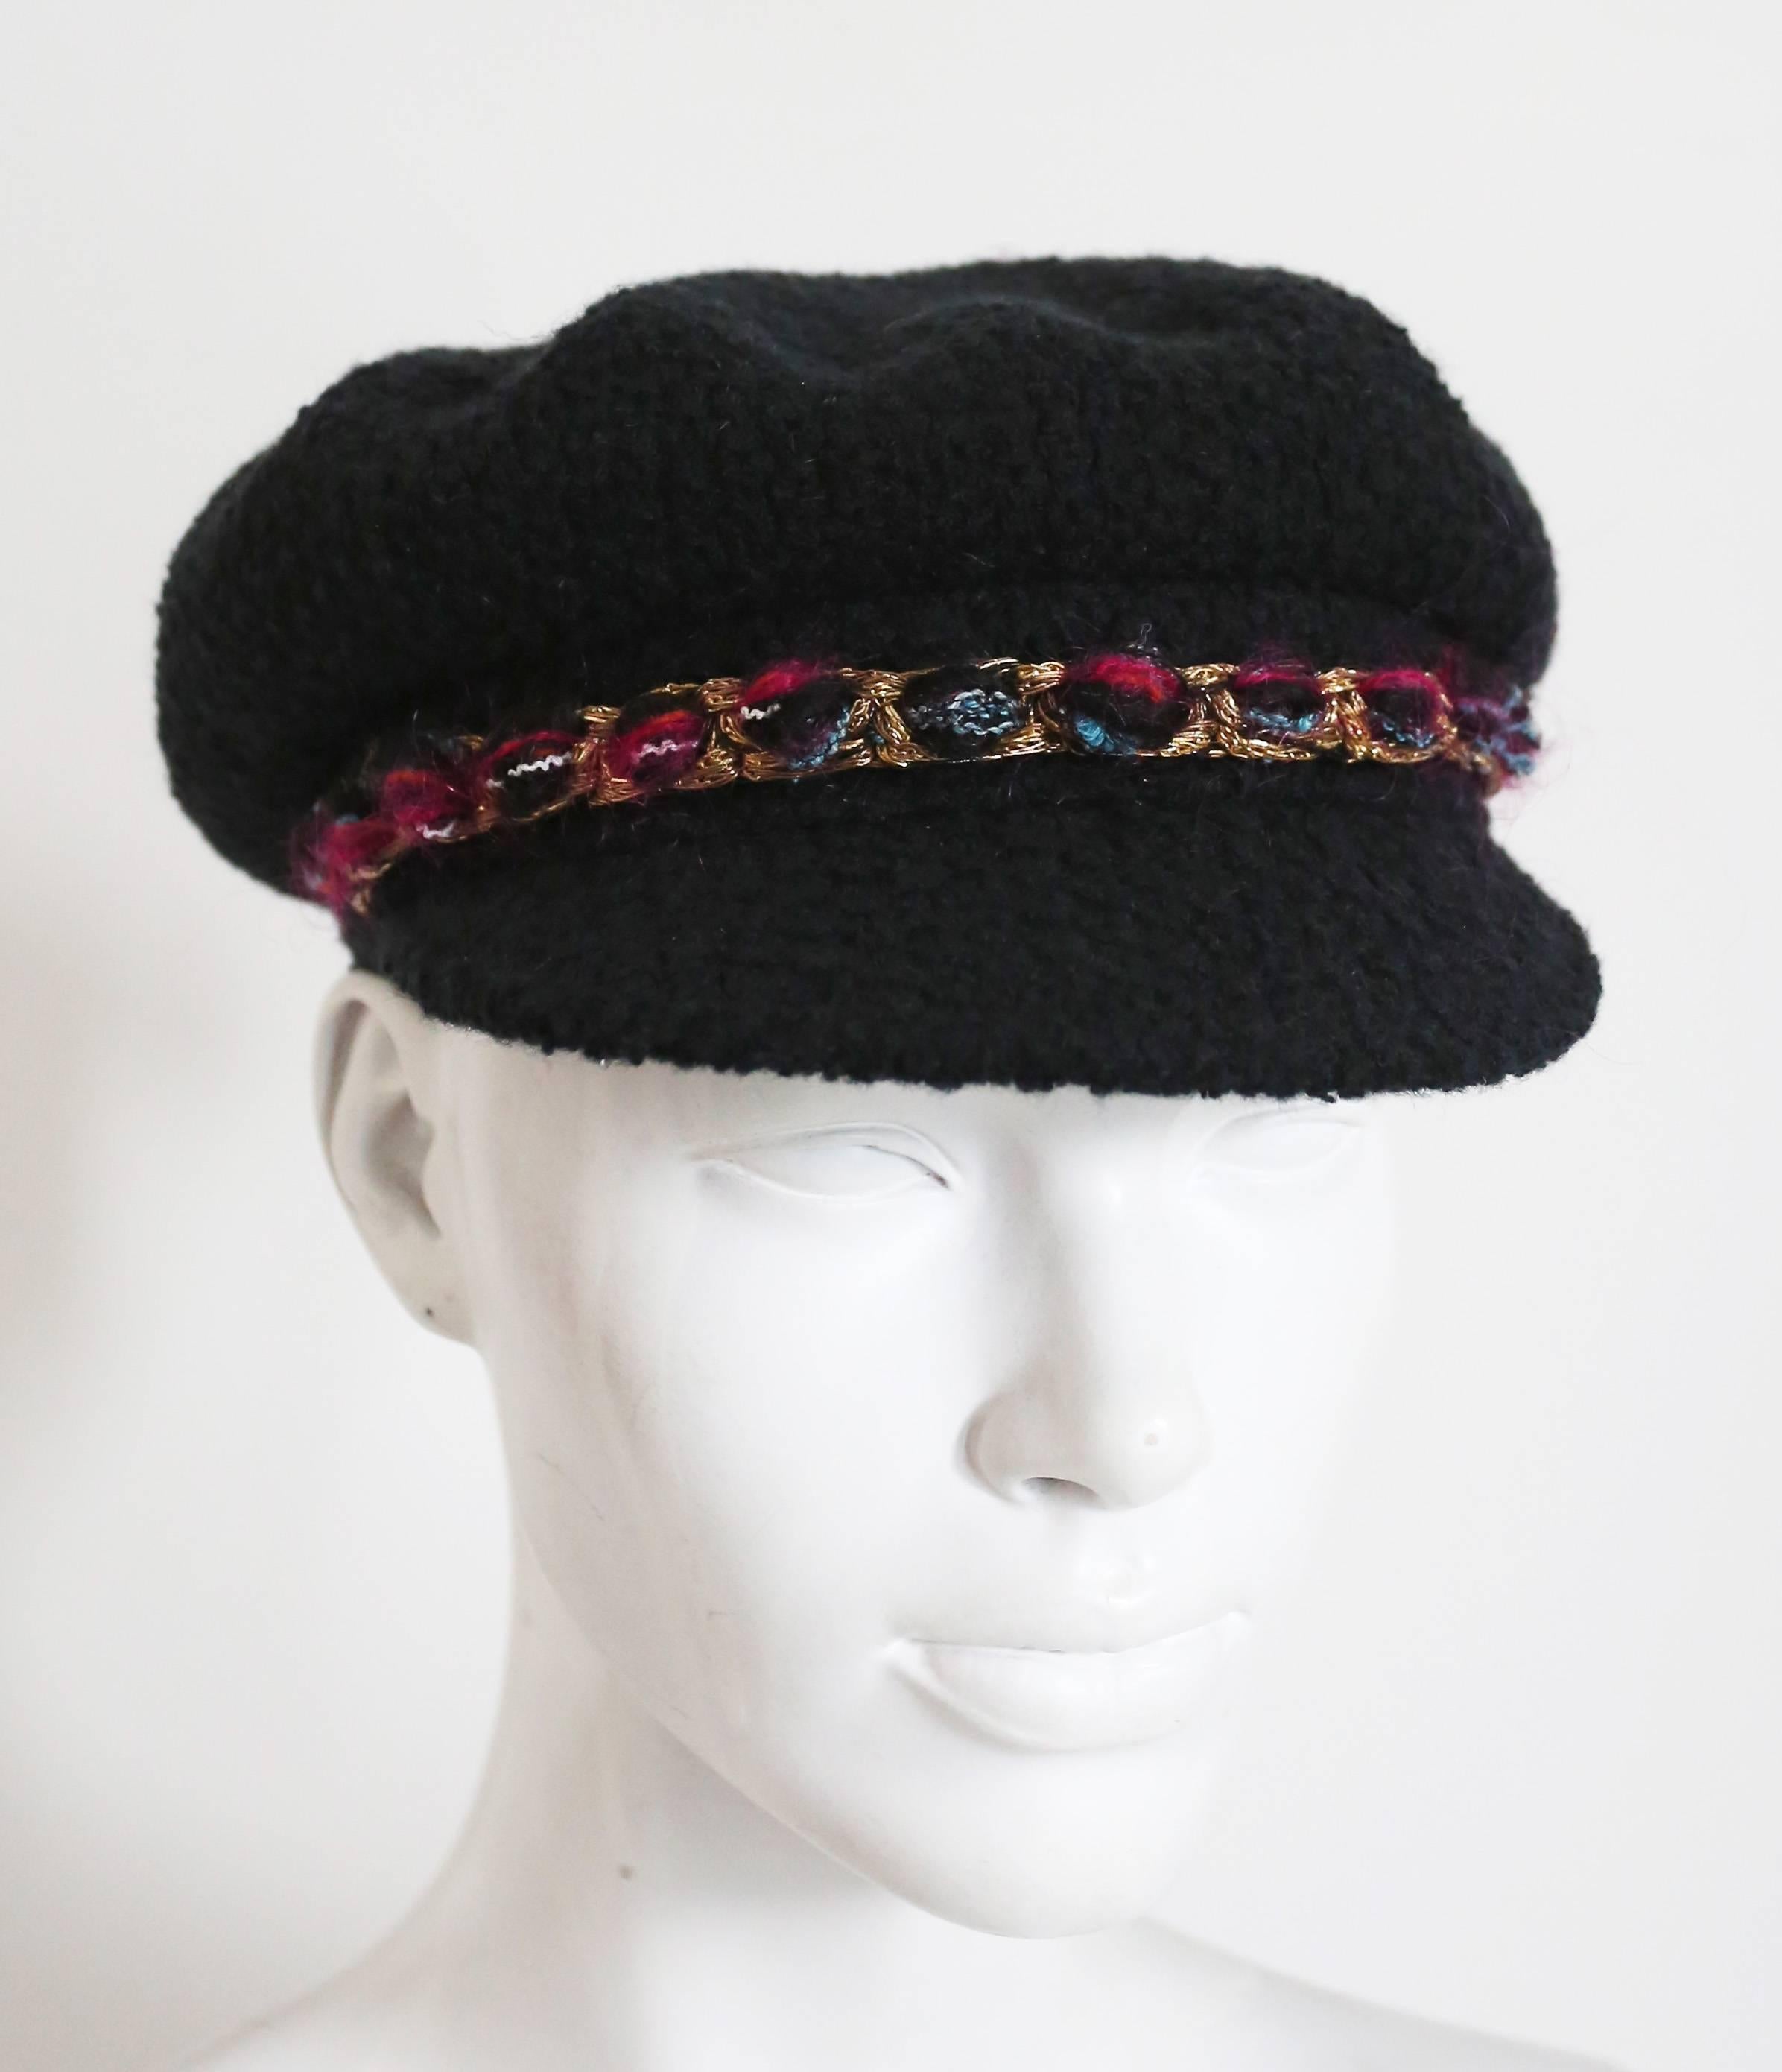 A rare Chanel tweed newsboy cap as seen on Kate Moss

Small